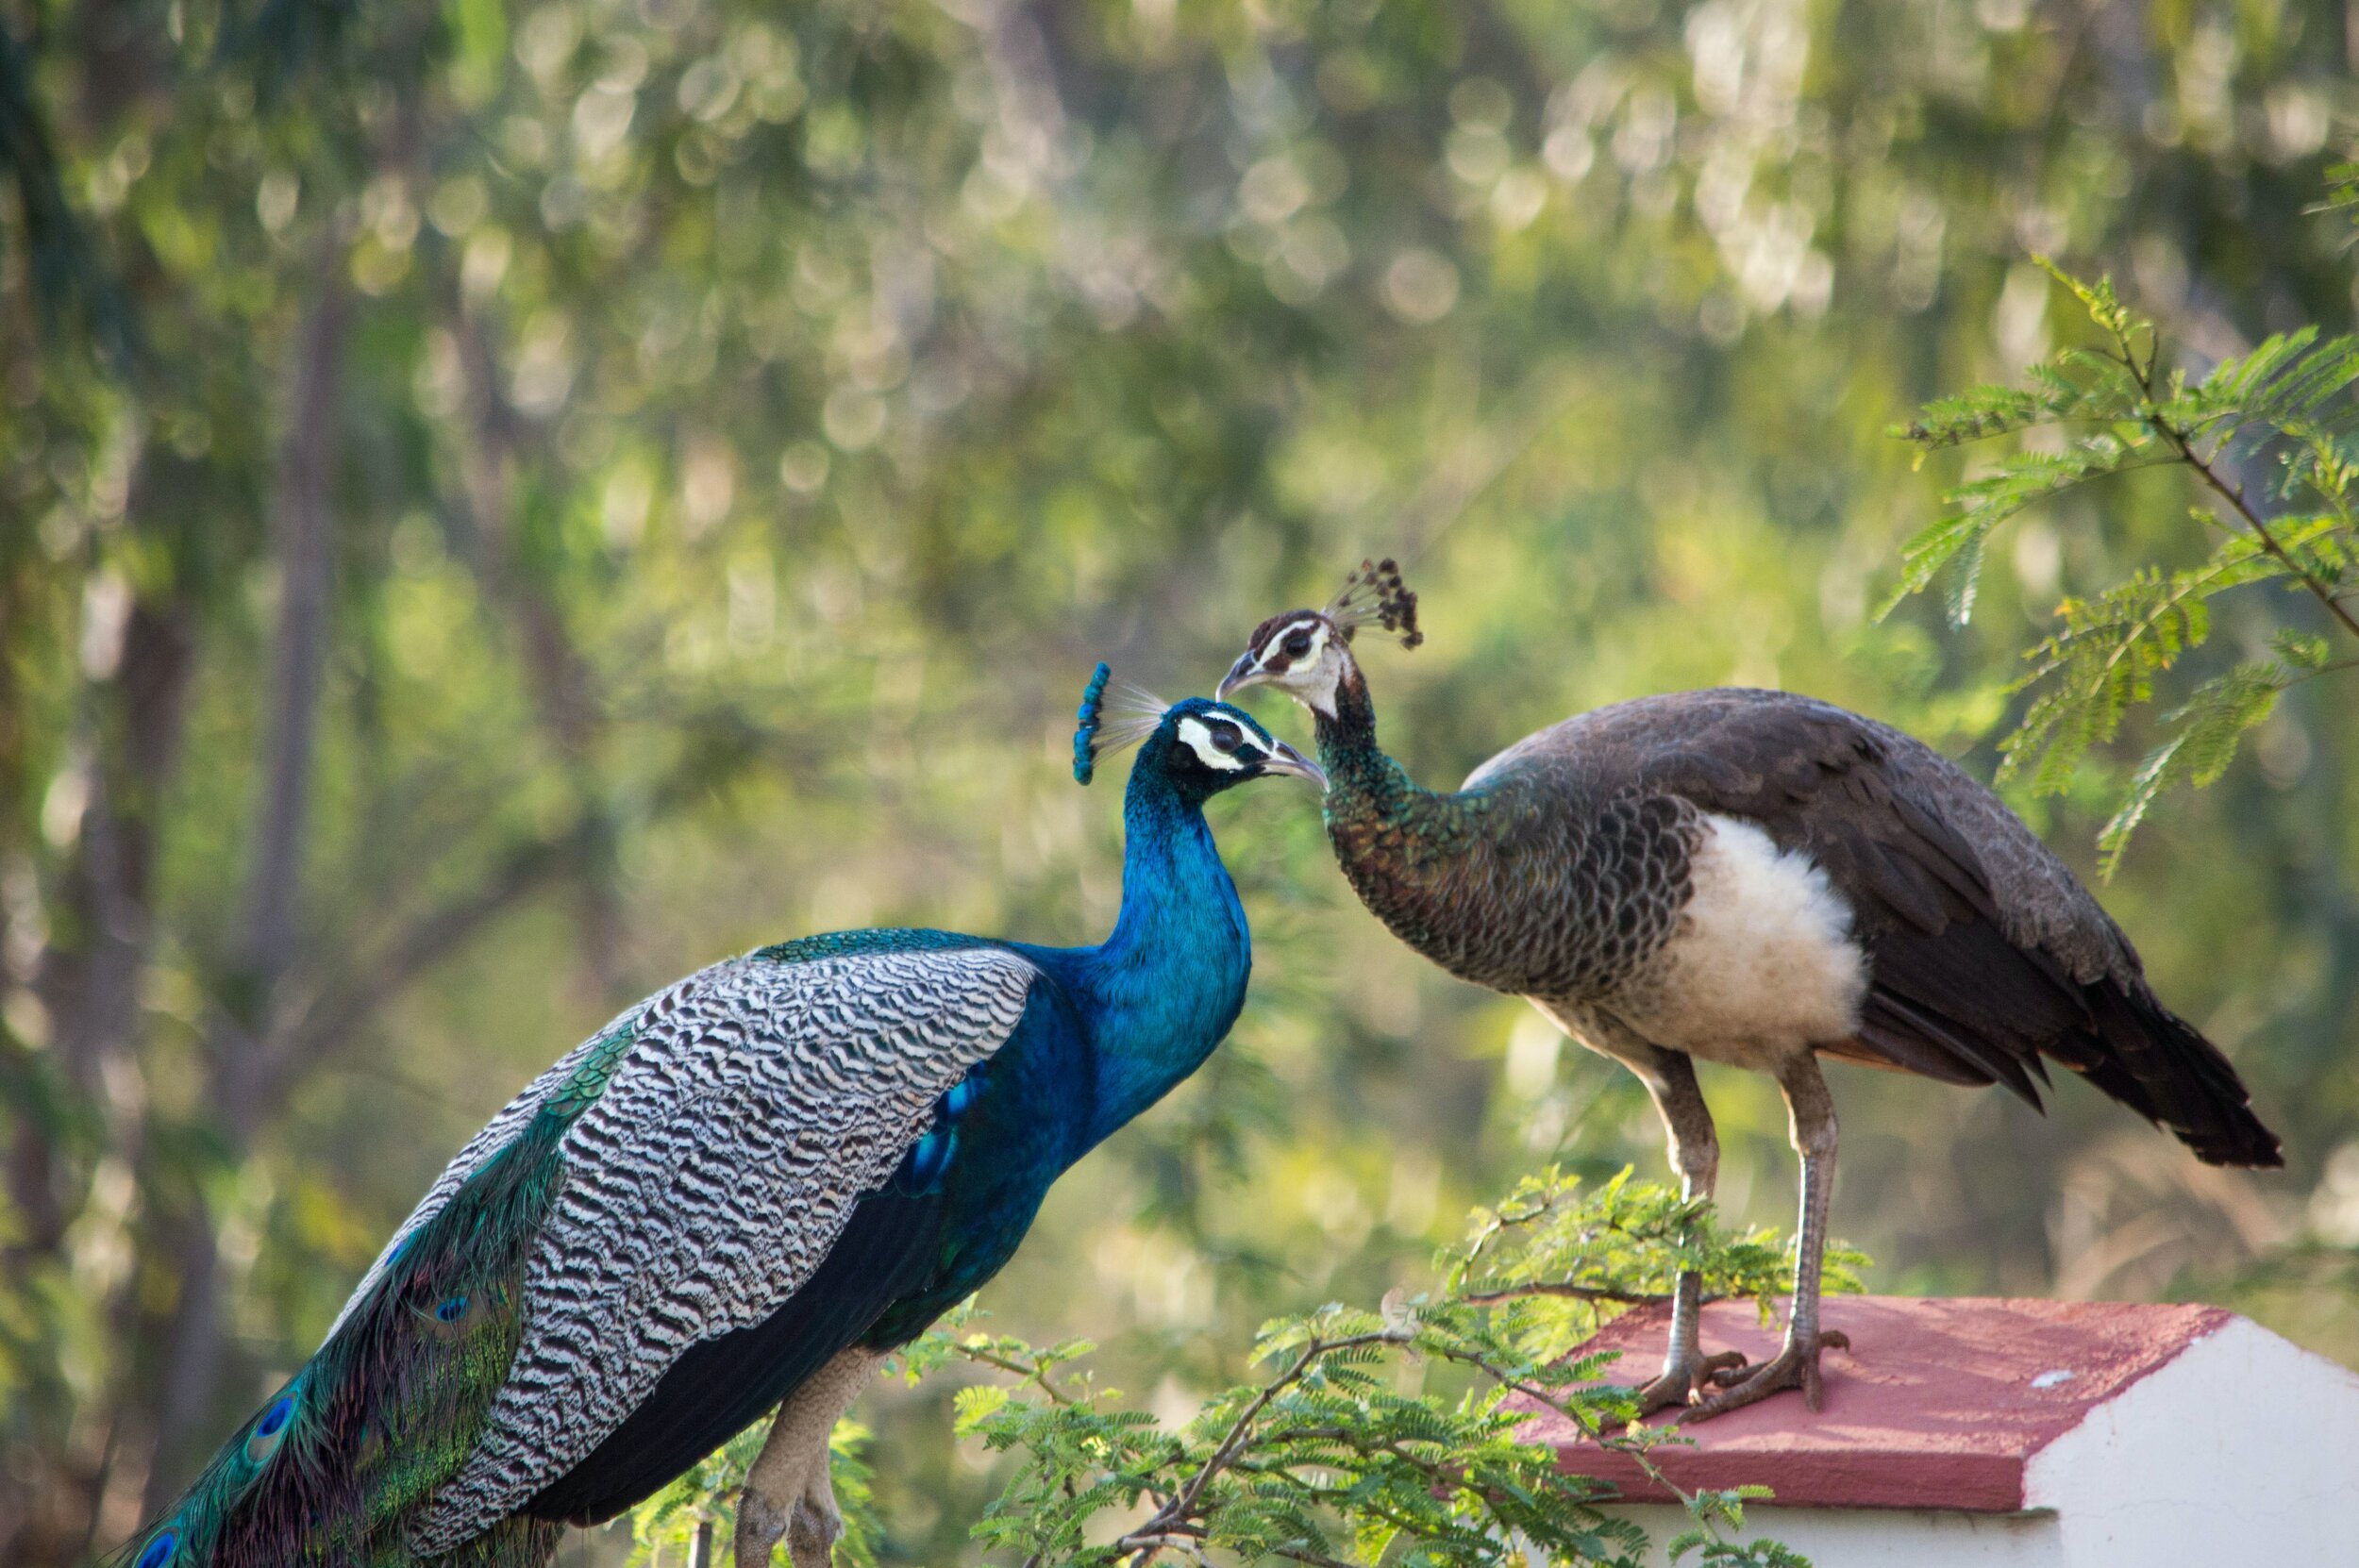 peacock-and-peahen-2683940.jpg